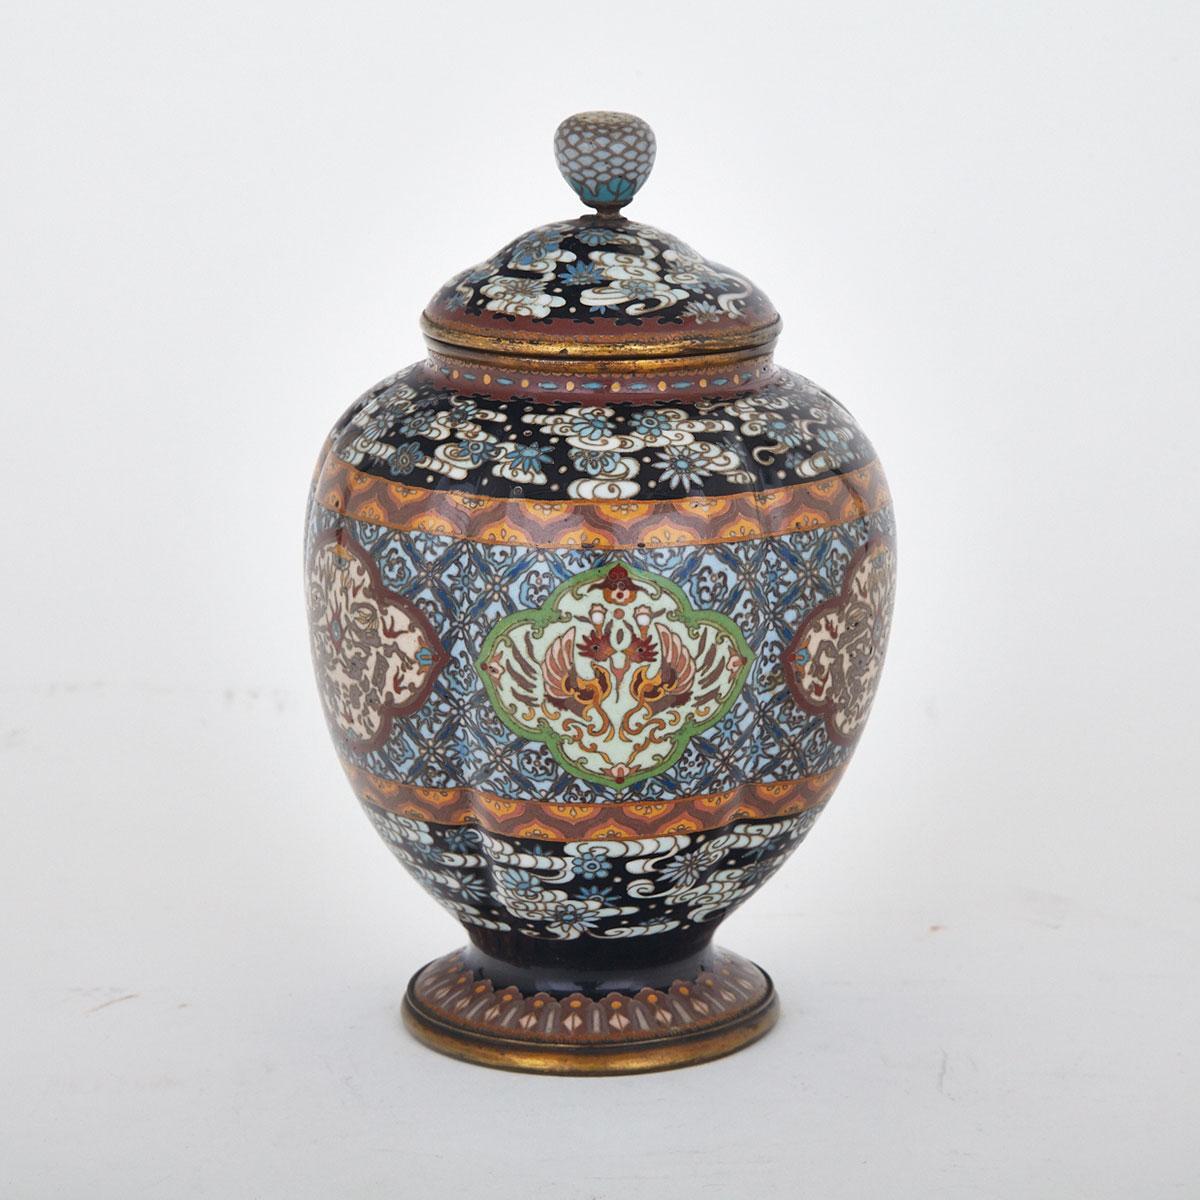 Cloisonné Enamel Lobed Jar and Cover, Japan, Early 20th Century